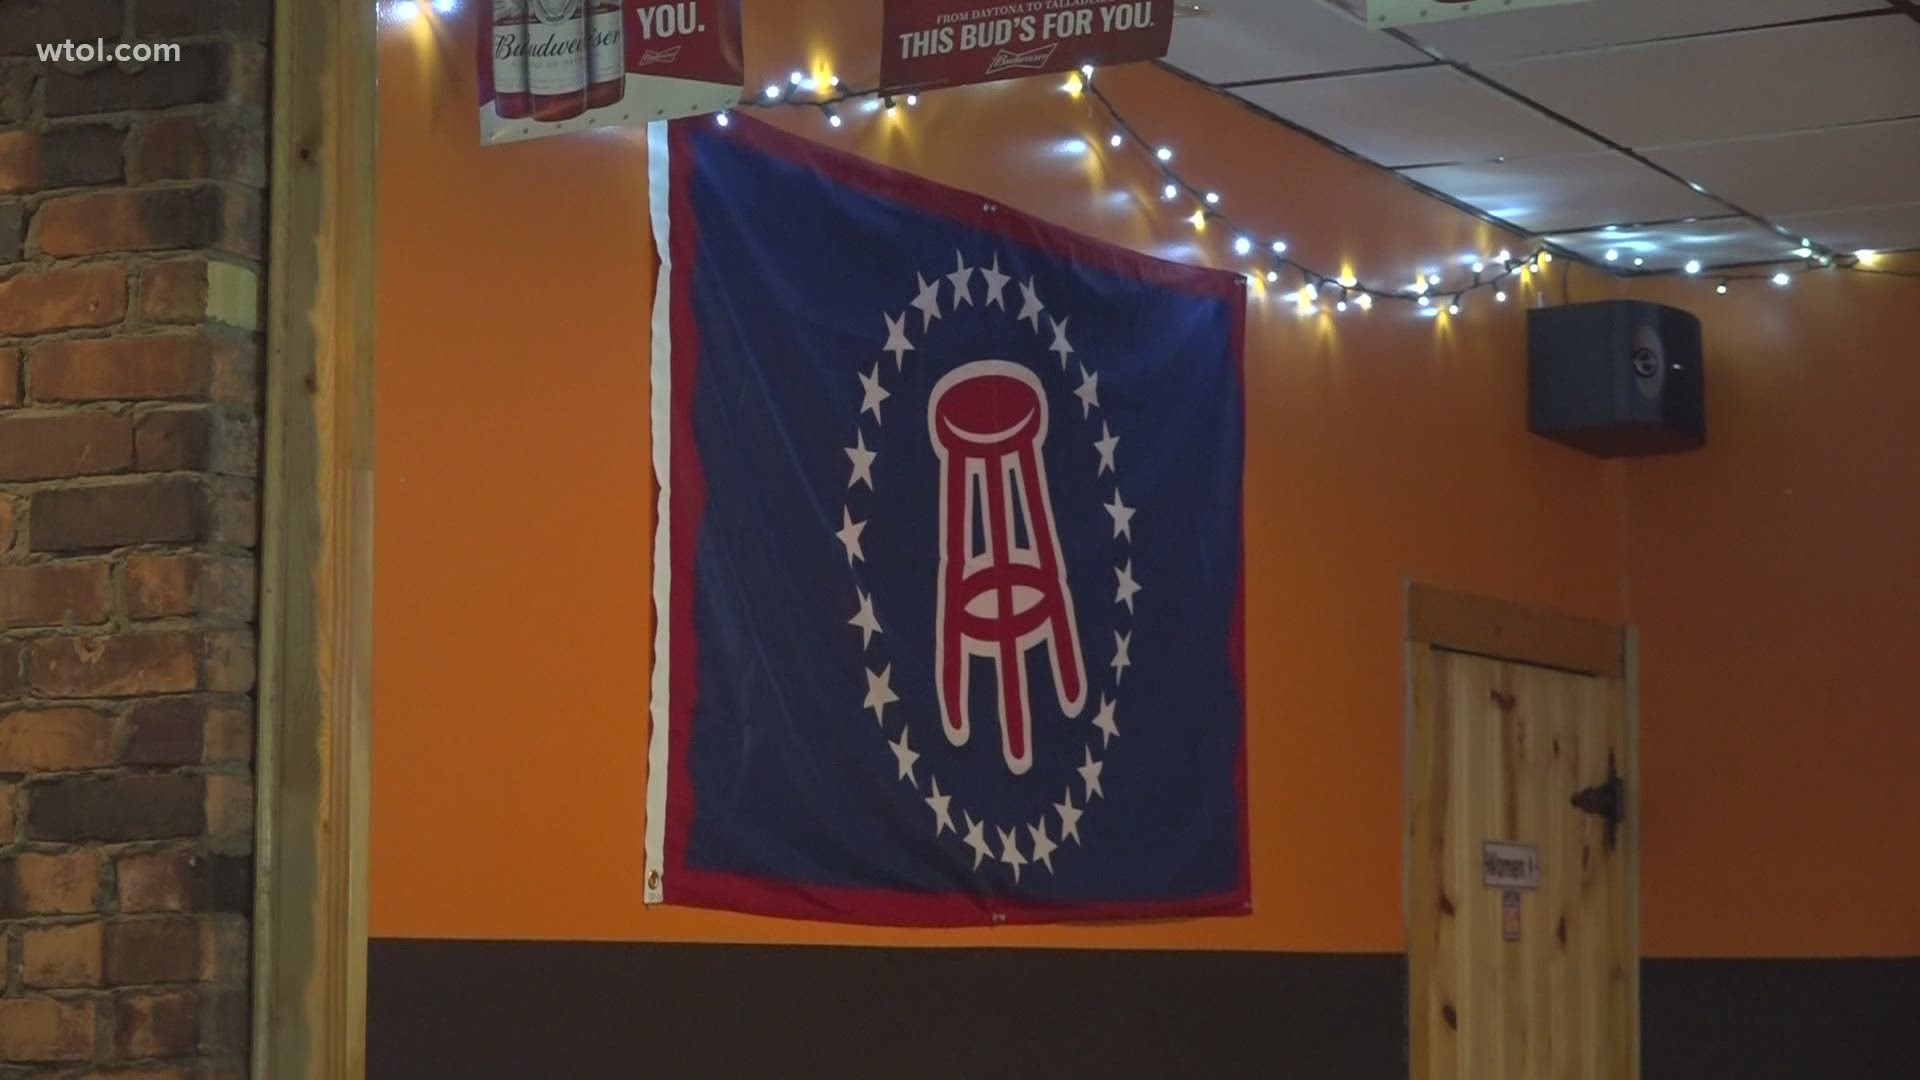 The fundraiser organized by Barstool Sports founder Dave Portnoy raises money for small businesses across the country struggling because of the pandemic.